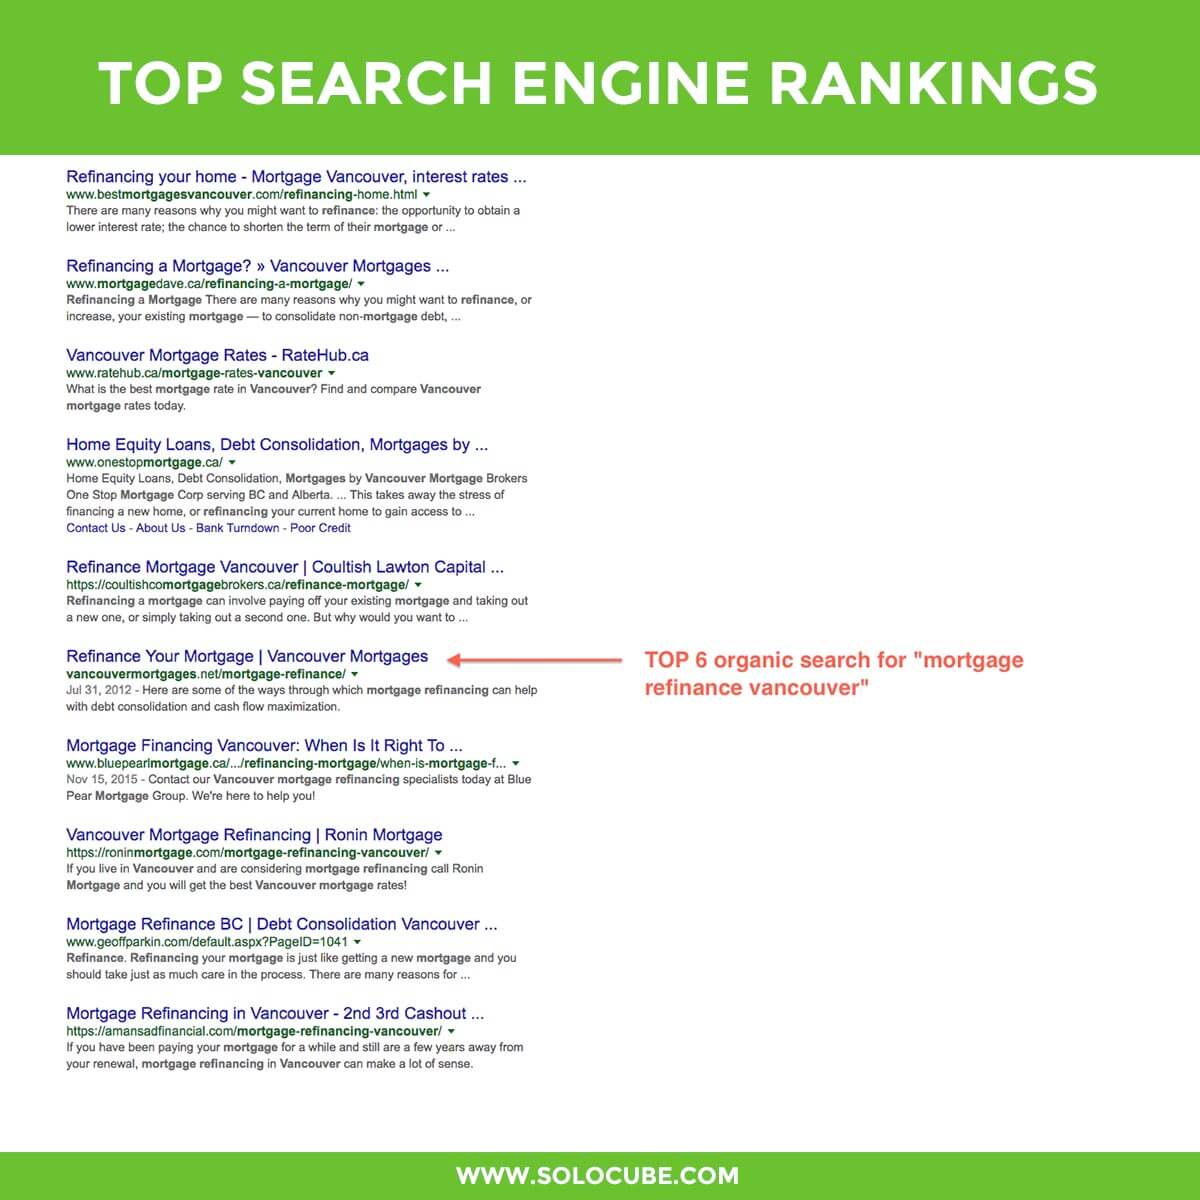 top SEO google ranking by solocube 09 - Vancouver SEO - Search Engine Optimization